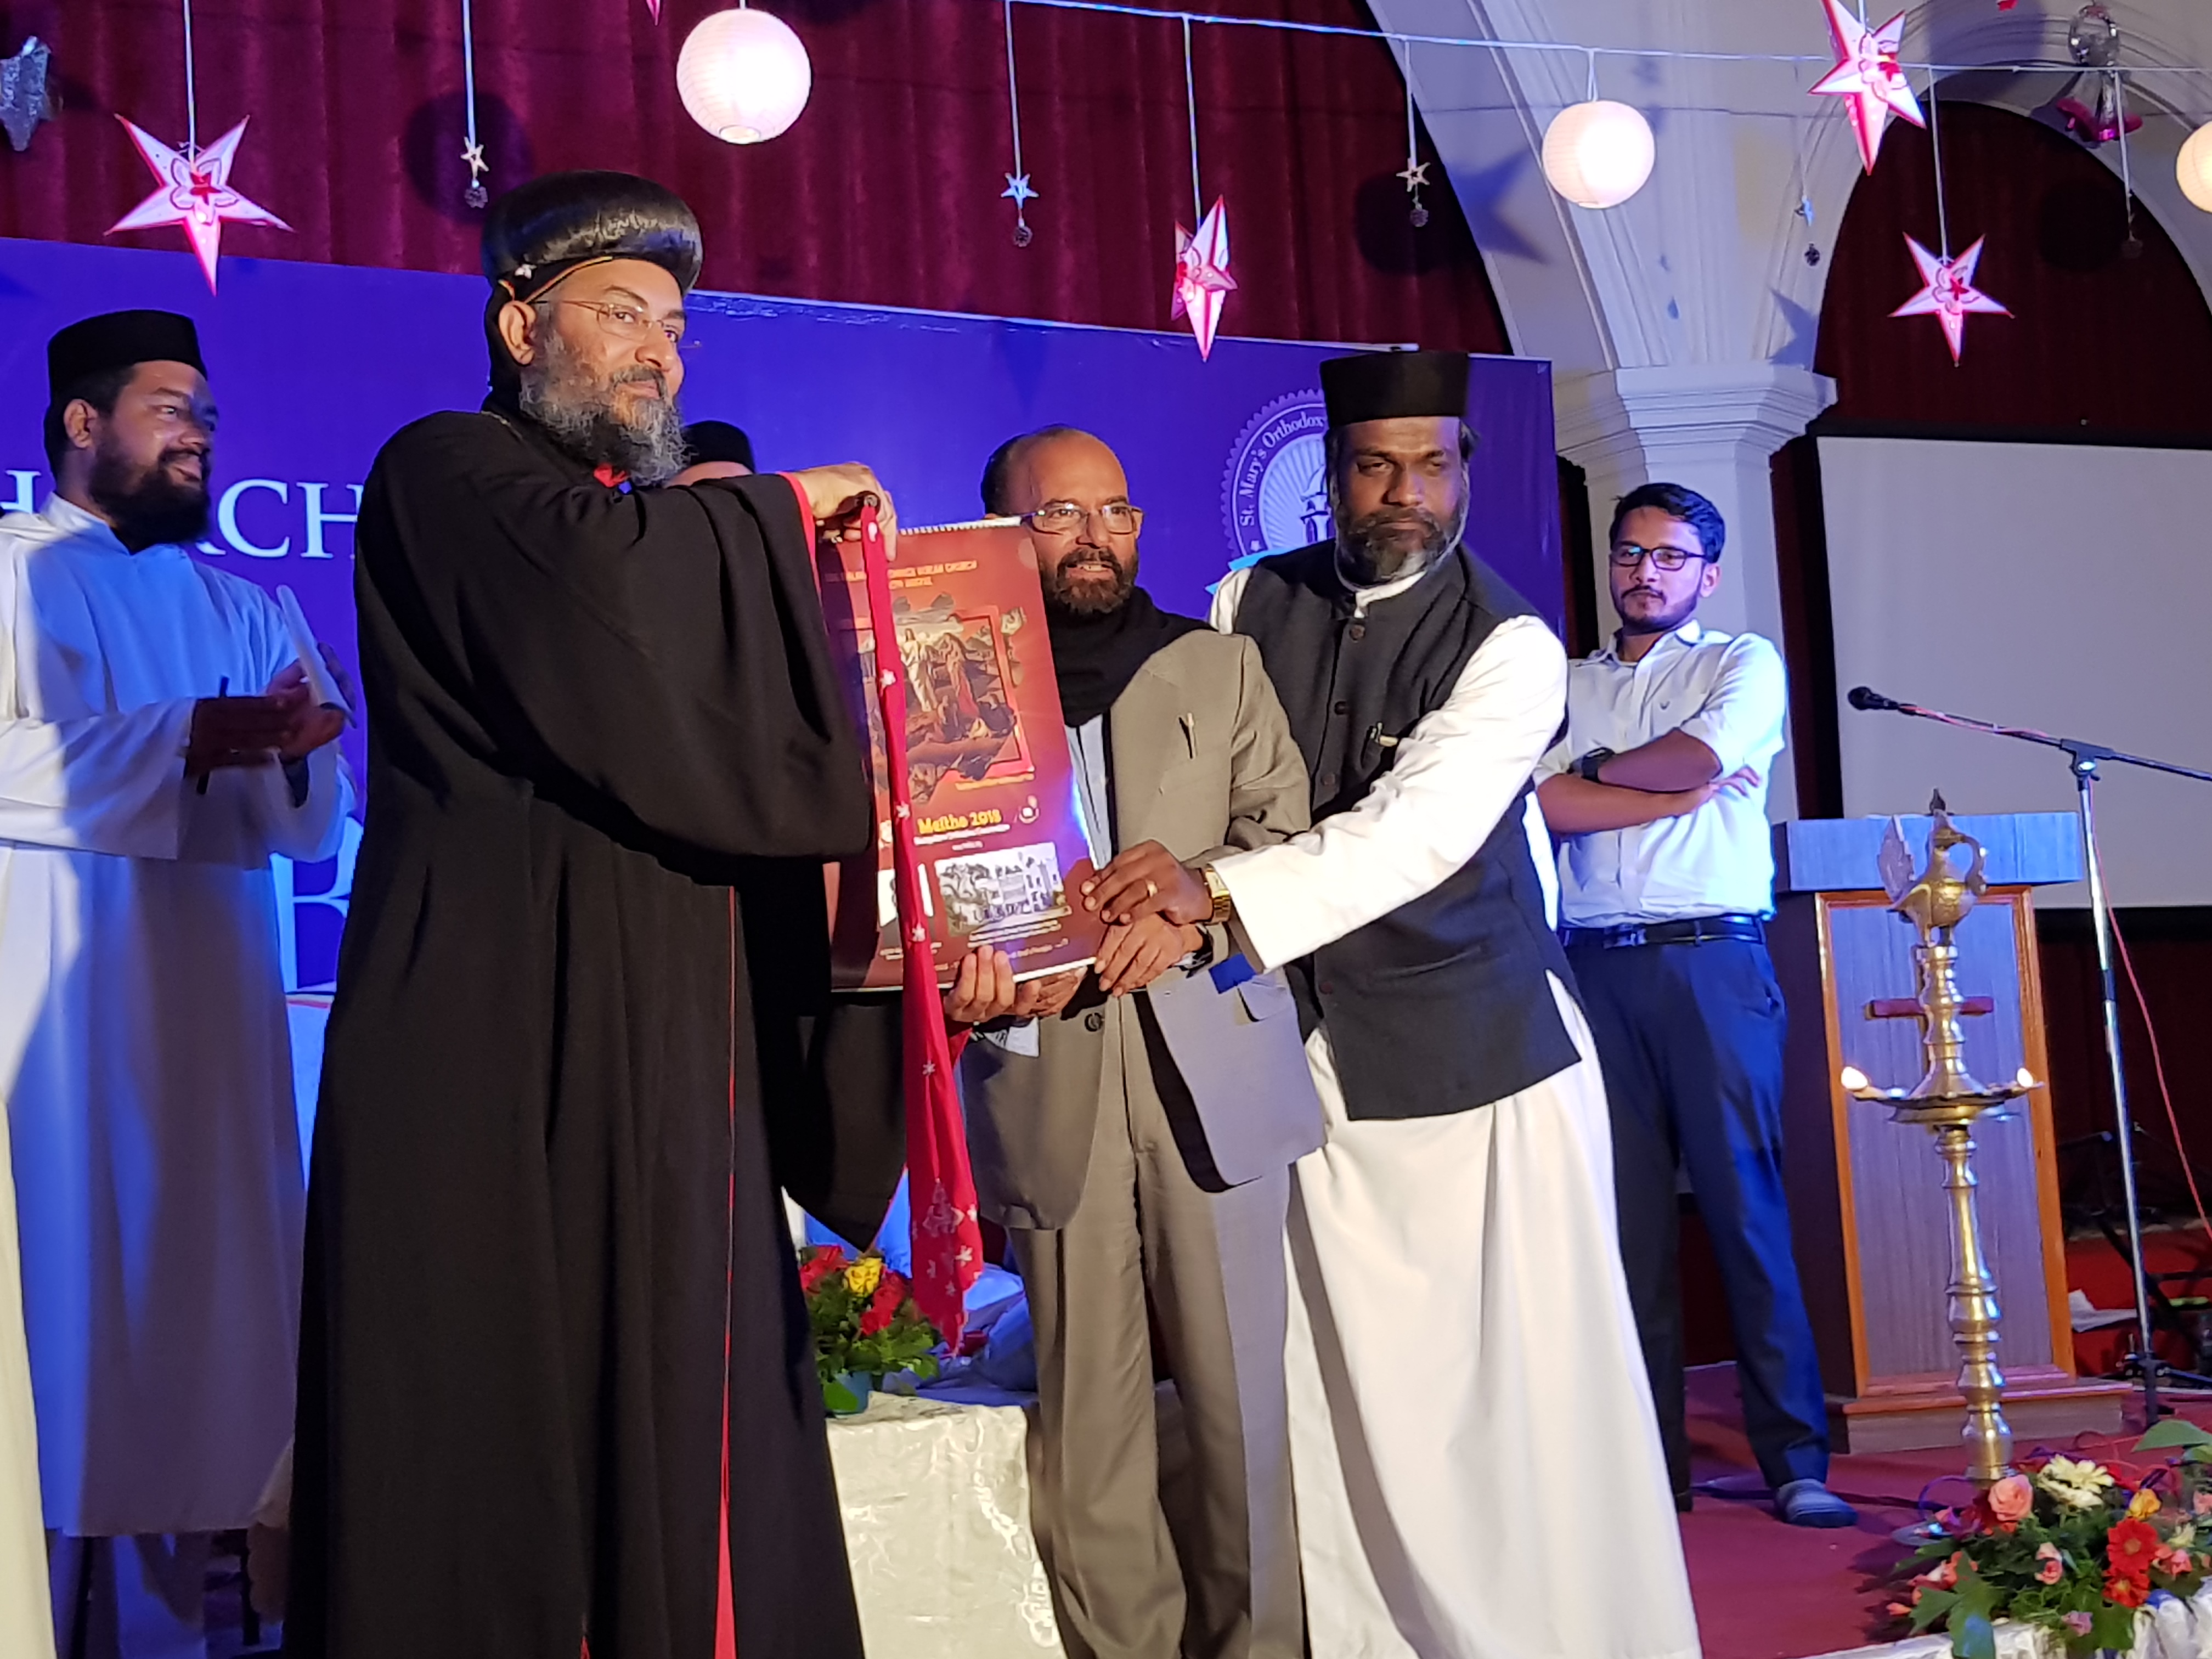 Metropolitan Mar Seraphim launches Meltho calendar 2018  which profiles Prophet Moses and Holy Fathers